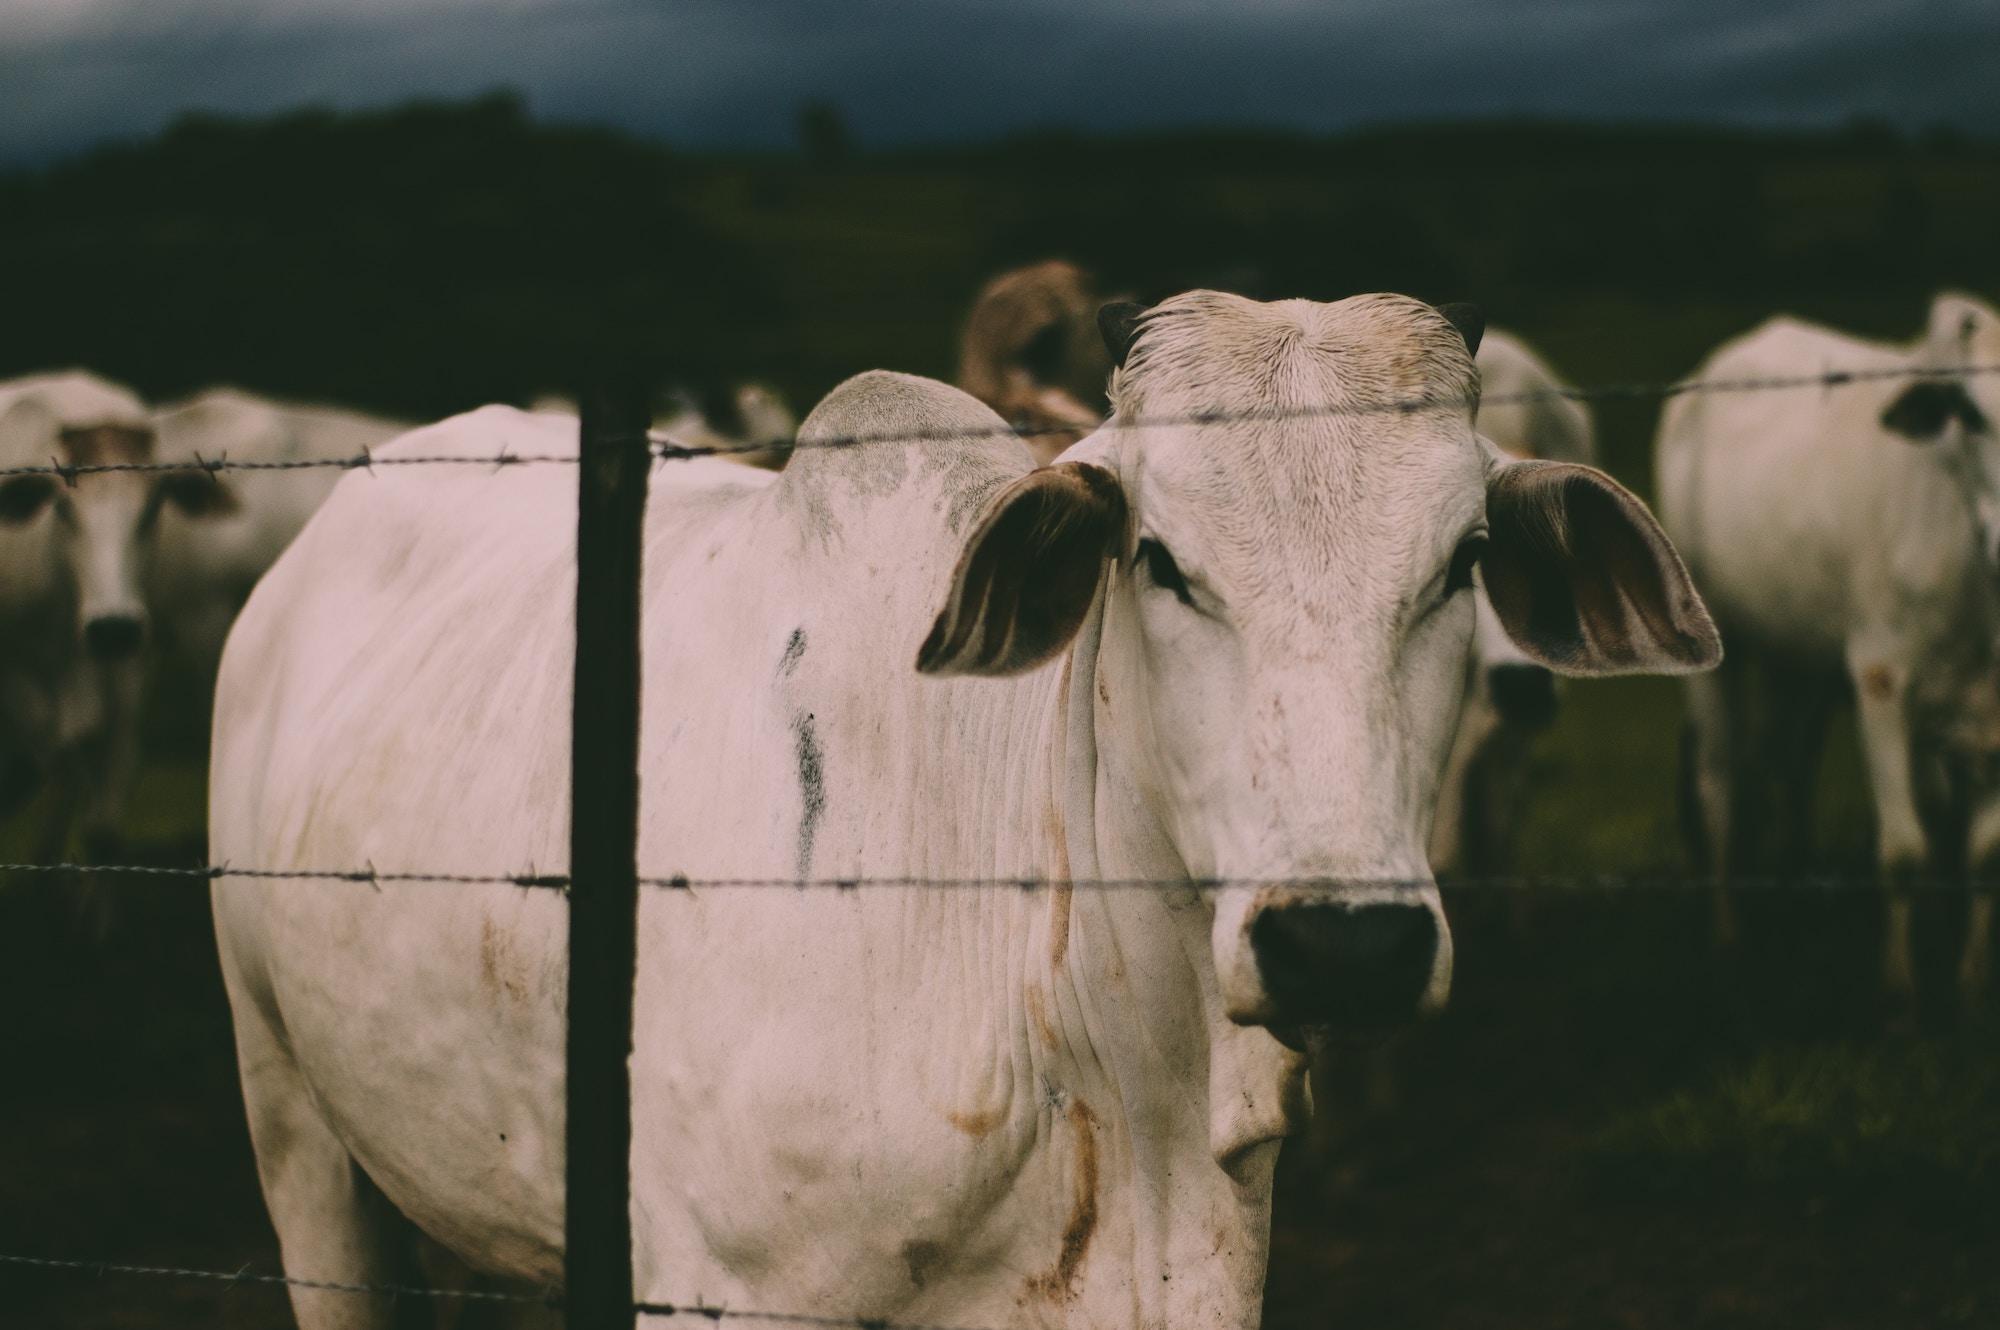 Brazil is targeting illegal cattle ranchers in a landmark operation